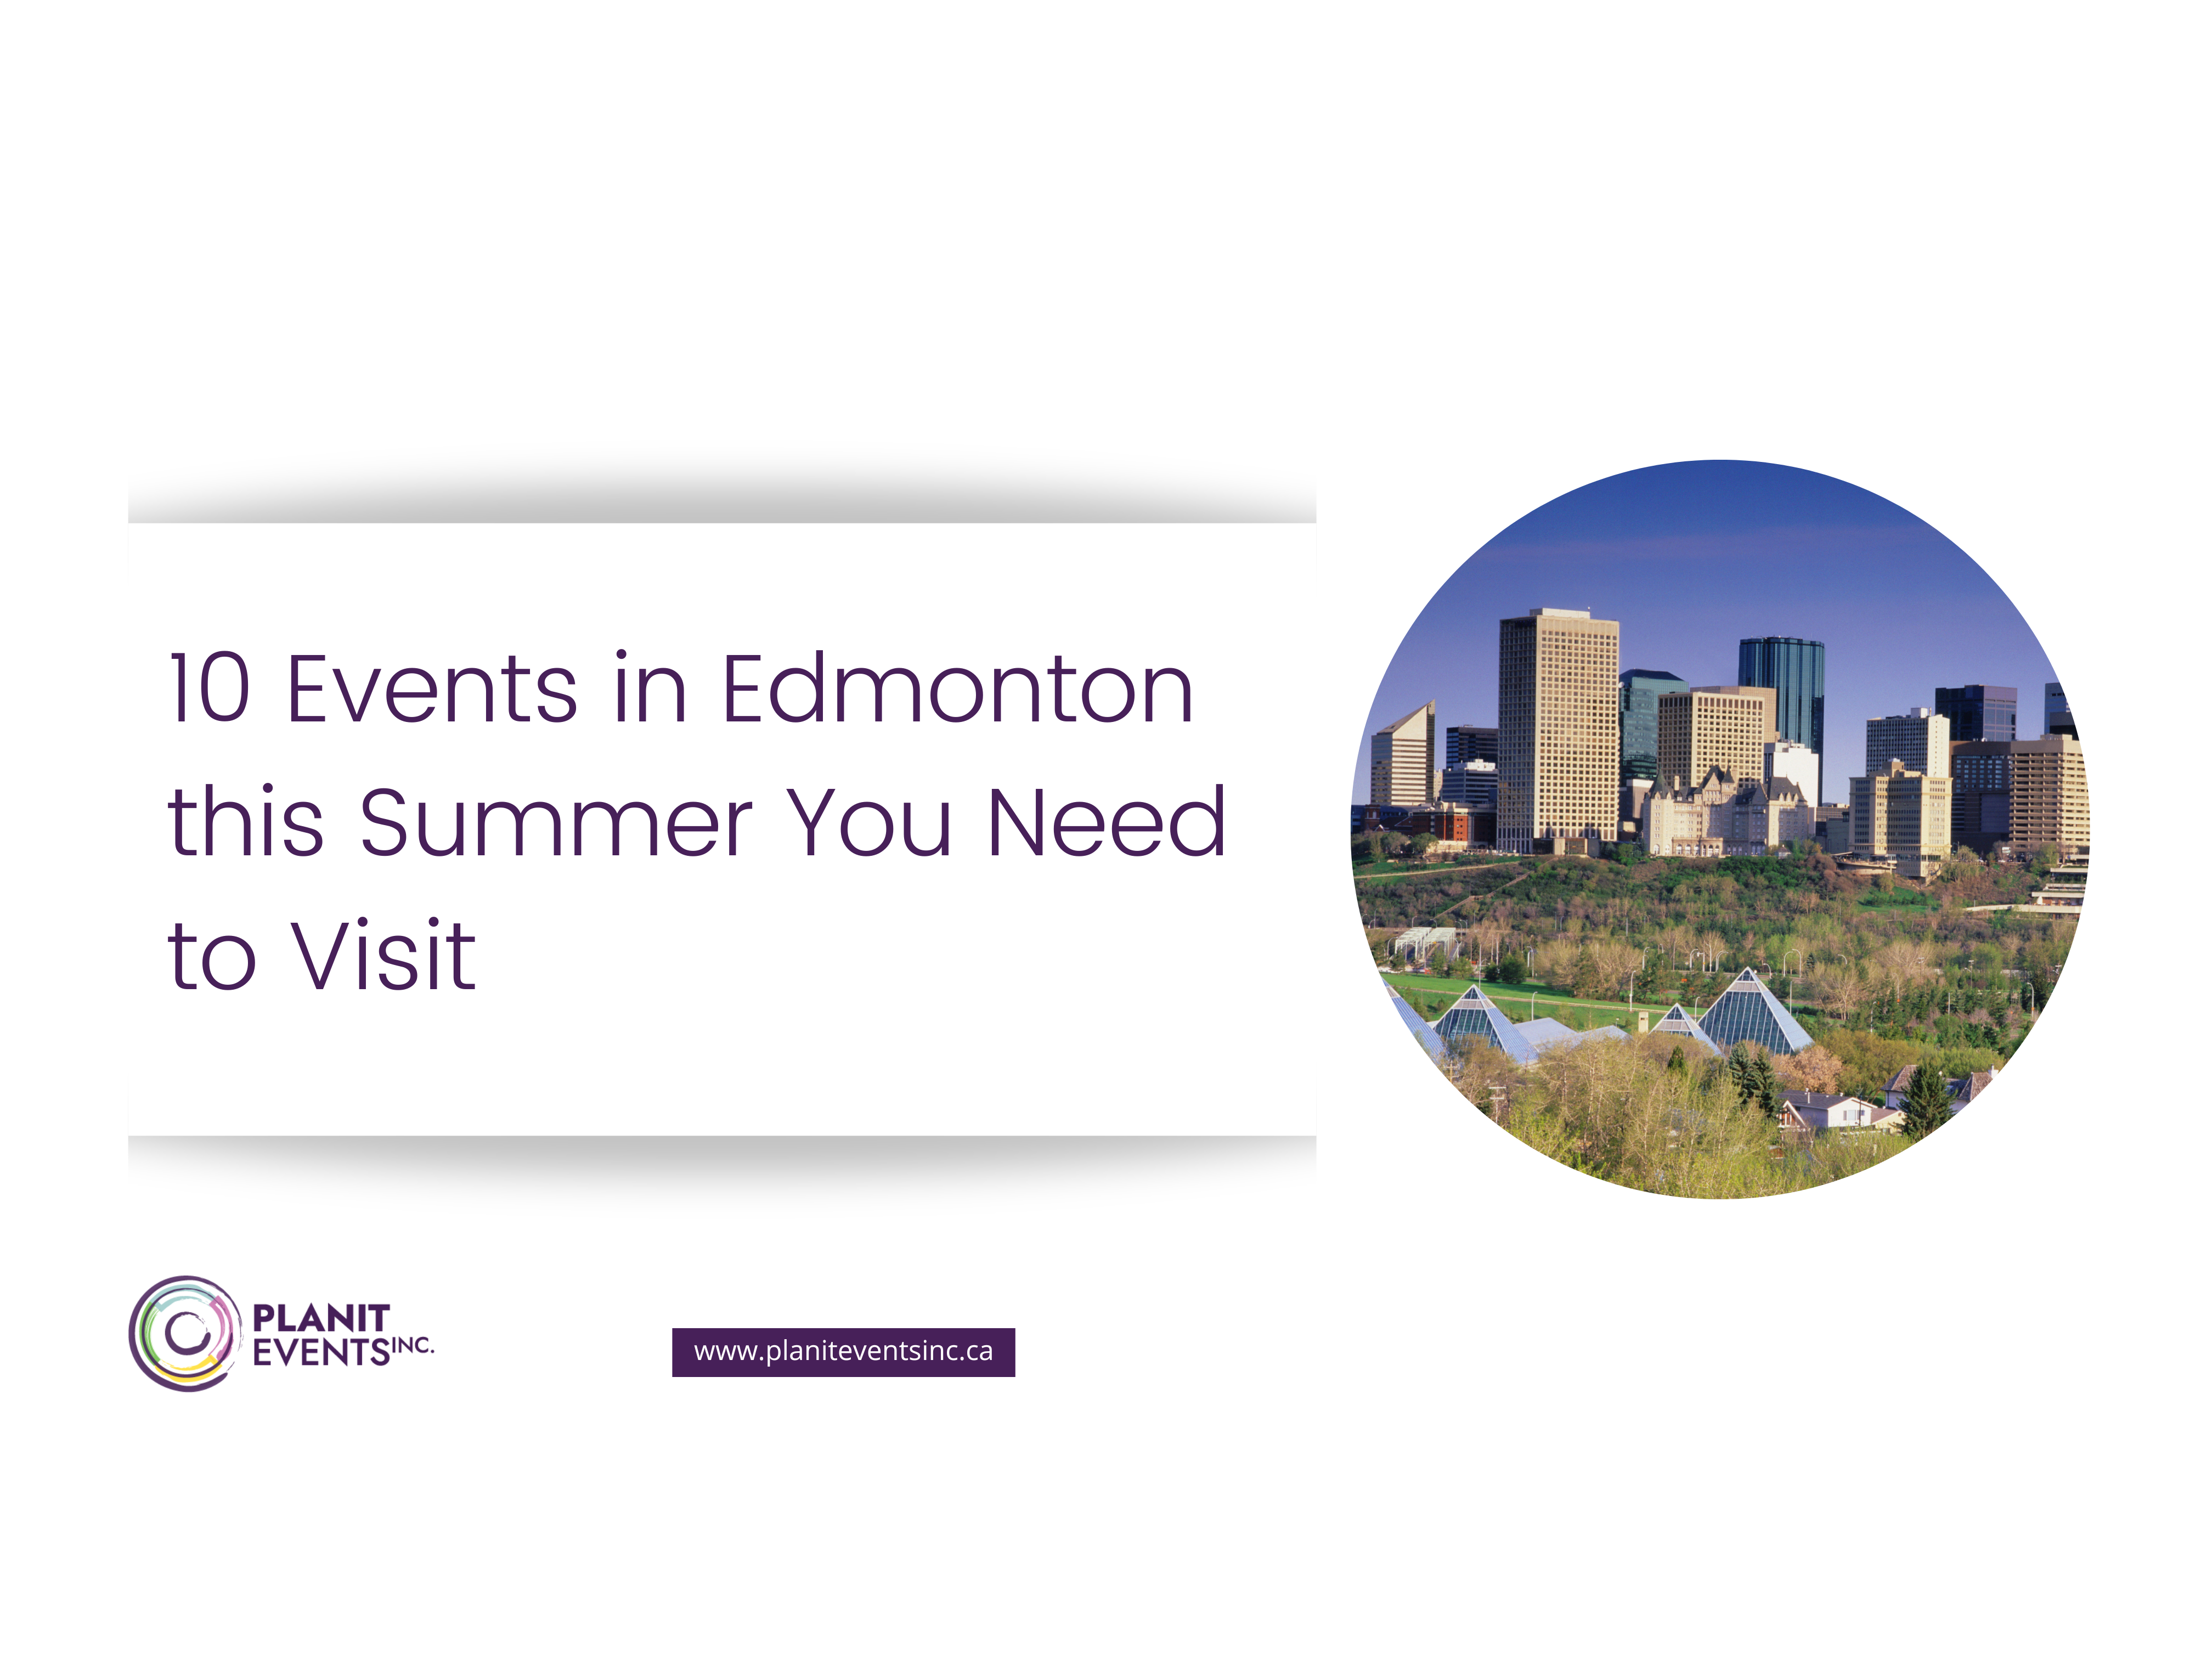 10 Events in Edmonton this Summer You Need to Attend